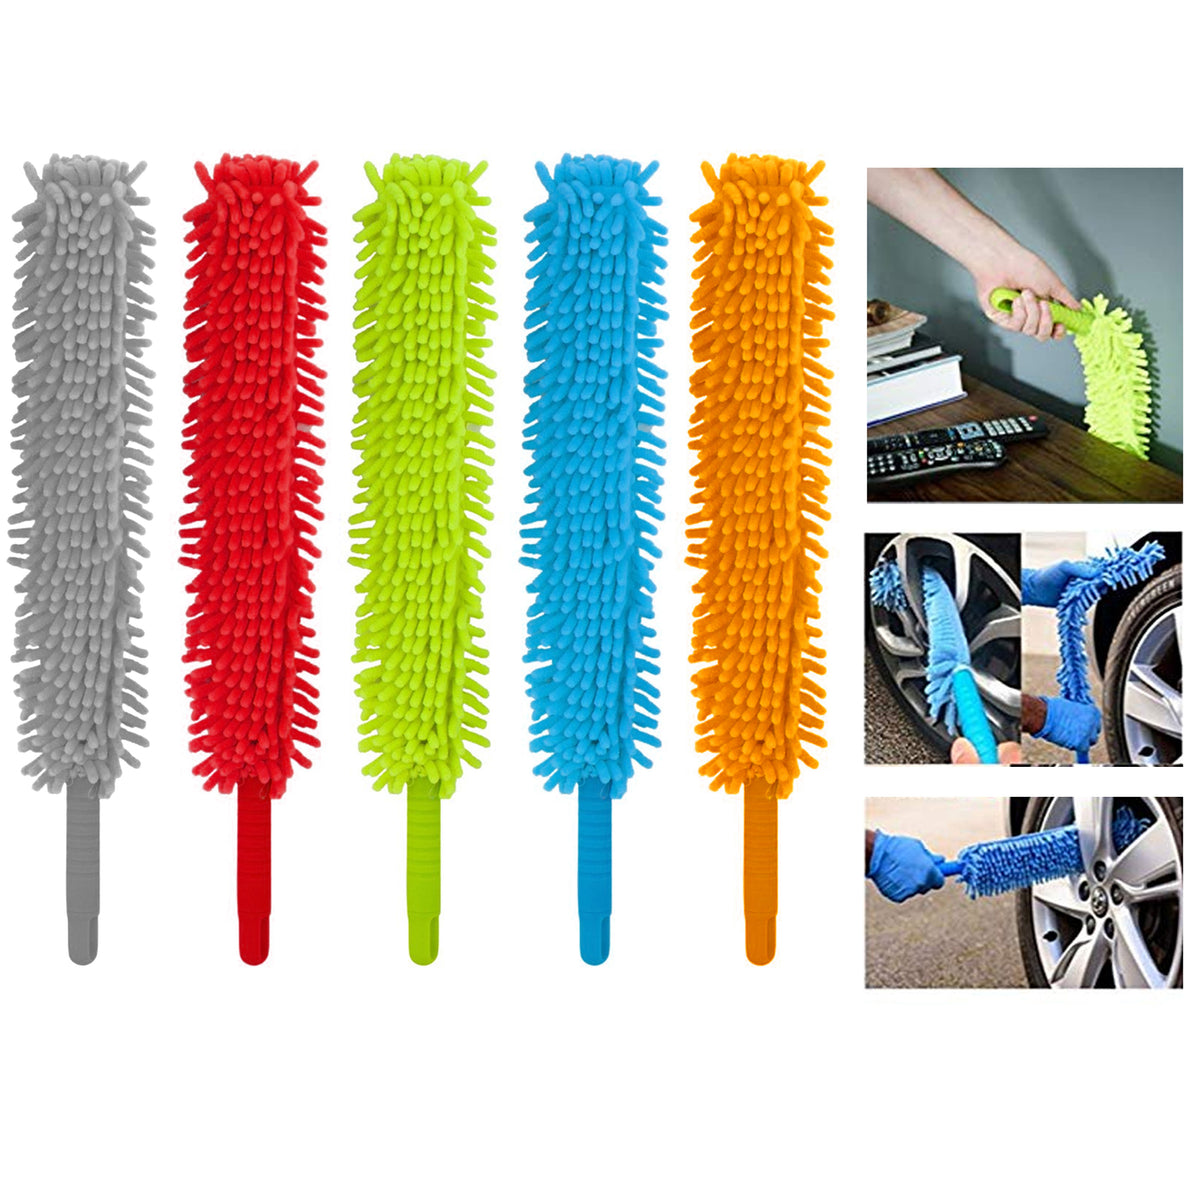 Microfiber Vent Cleaning Brush - Aftermarket 20619